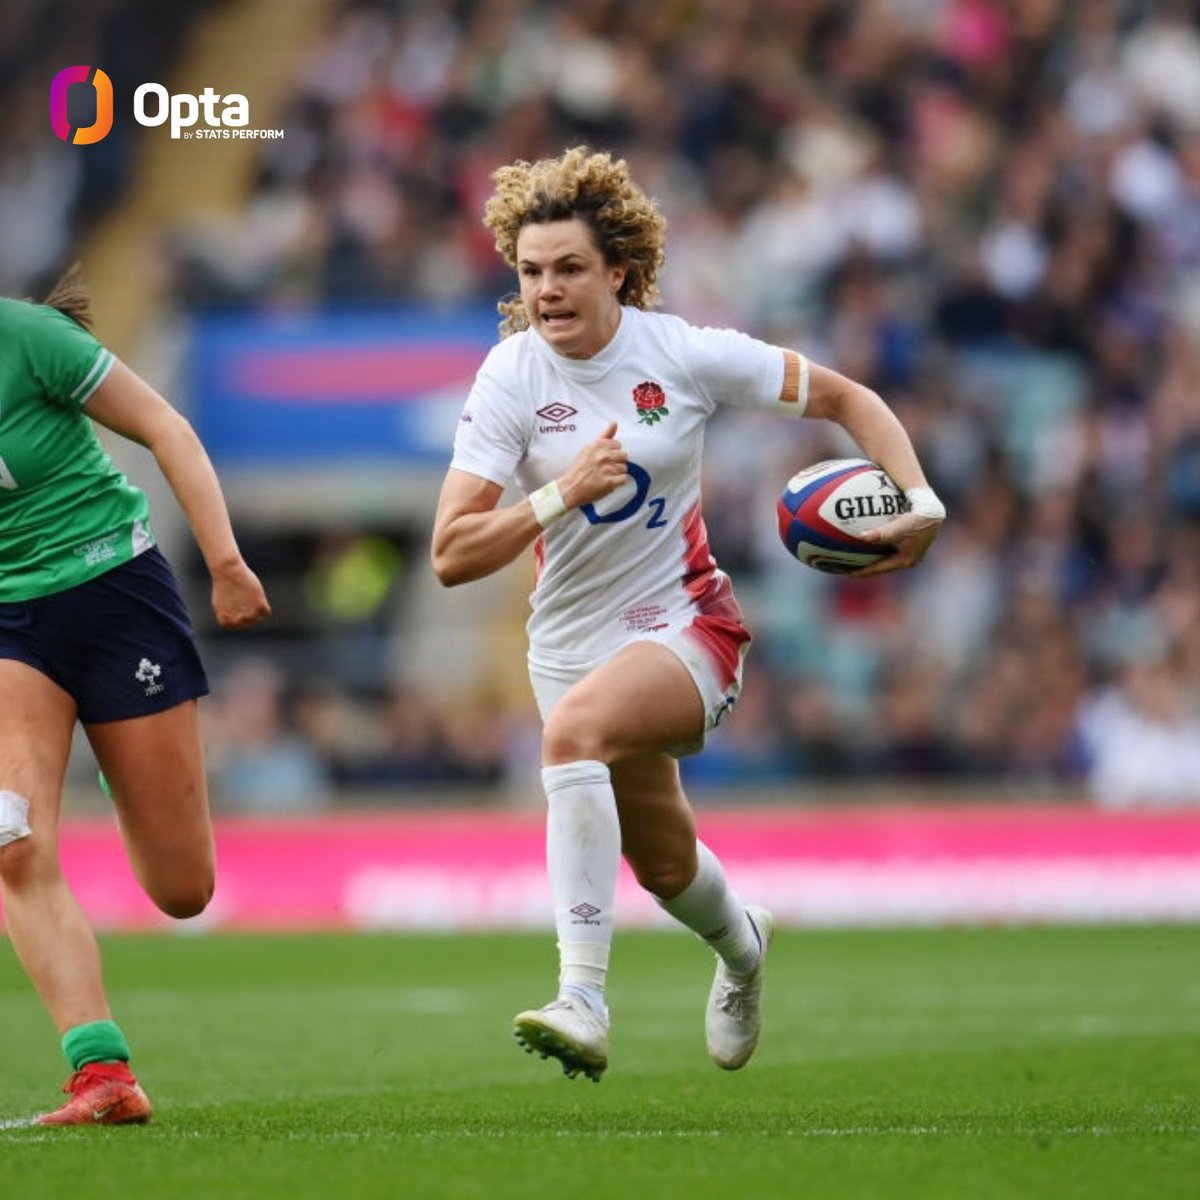 351 – In addition to scoring a hat-trick of tries, @RedRosesRugby’s Ellie Kildunne carried for 351 metres, beat 17 defenders and made six line breaks against Ireland, the highest tallies by any player in a @Womens6Nations match this decade. Superlative.